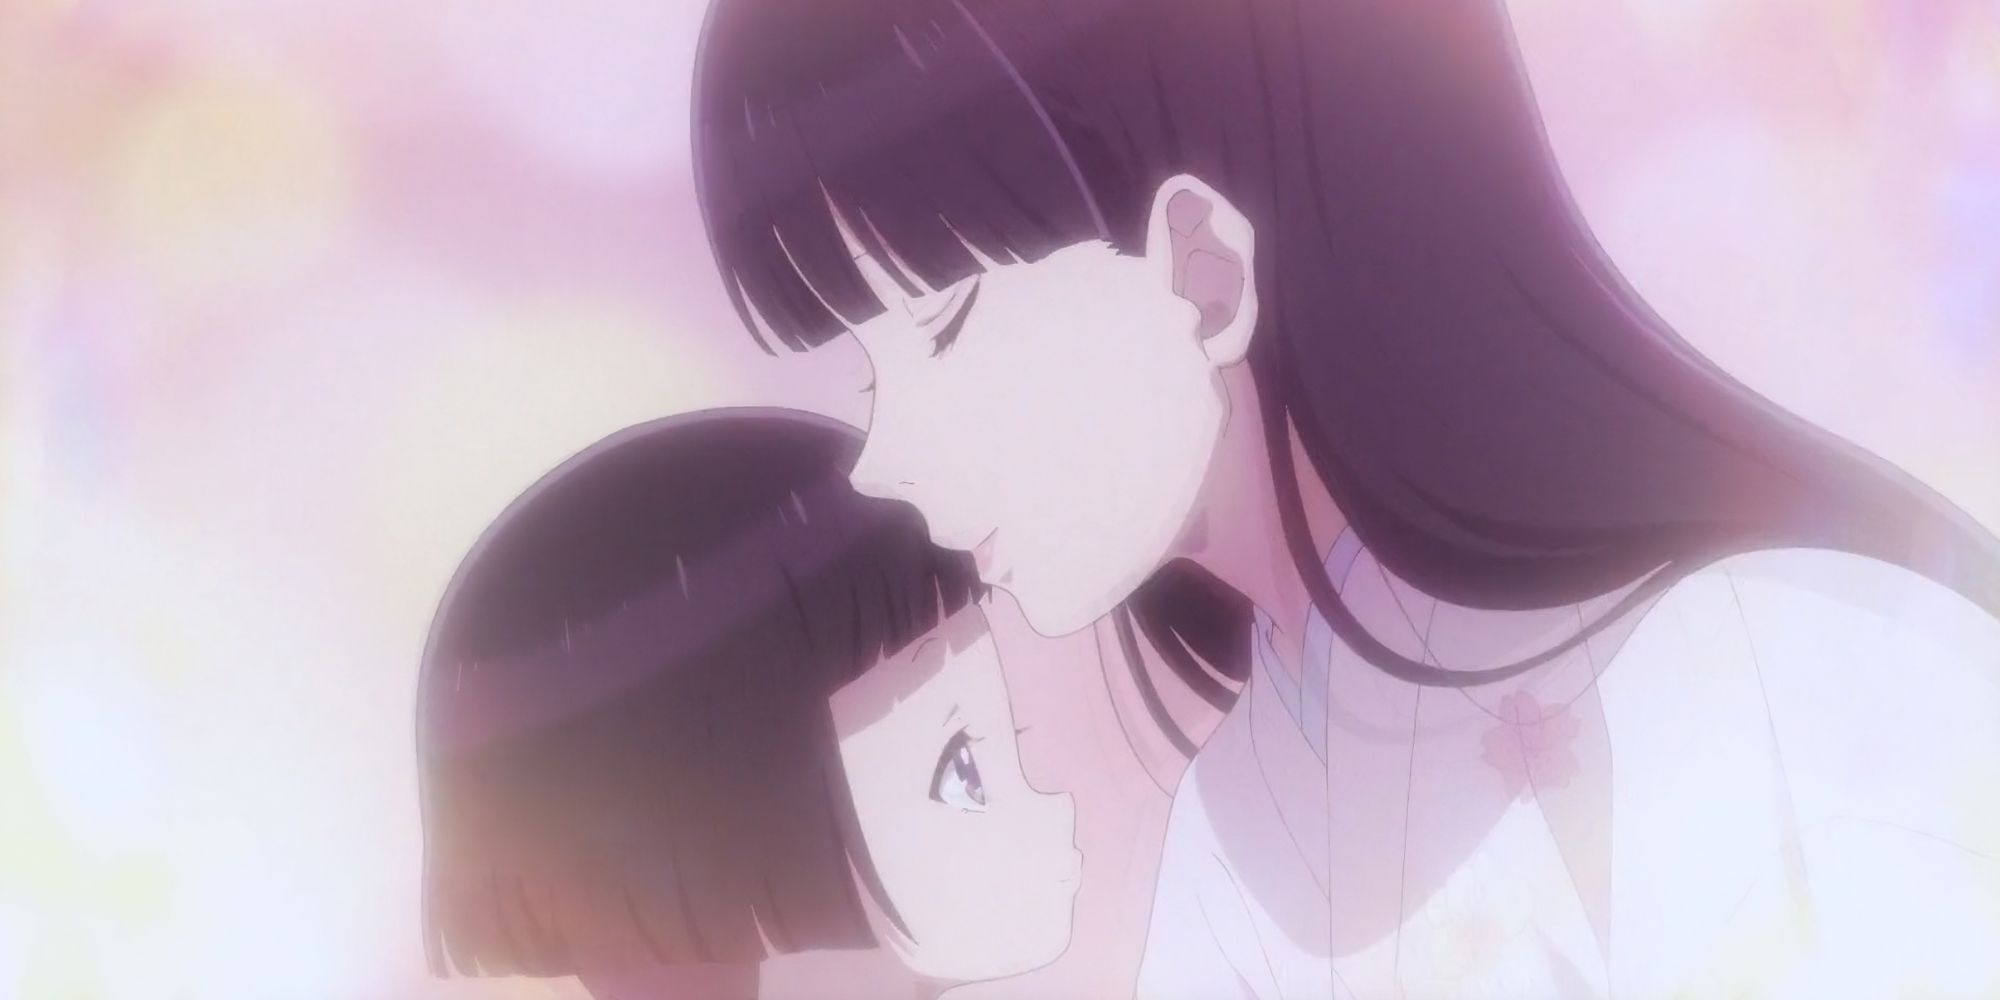 child Miyo Saimori from My Happy Marriage getting kissed on her forehead by her mother from Usuba bloodline